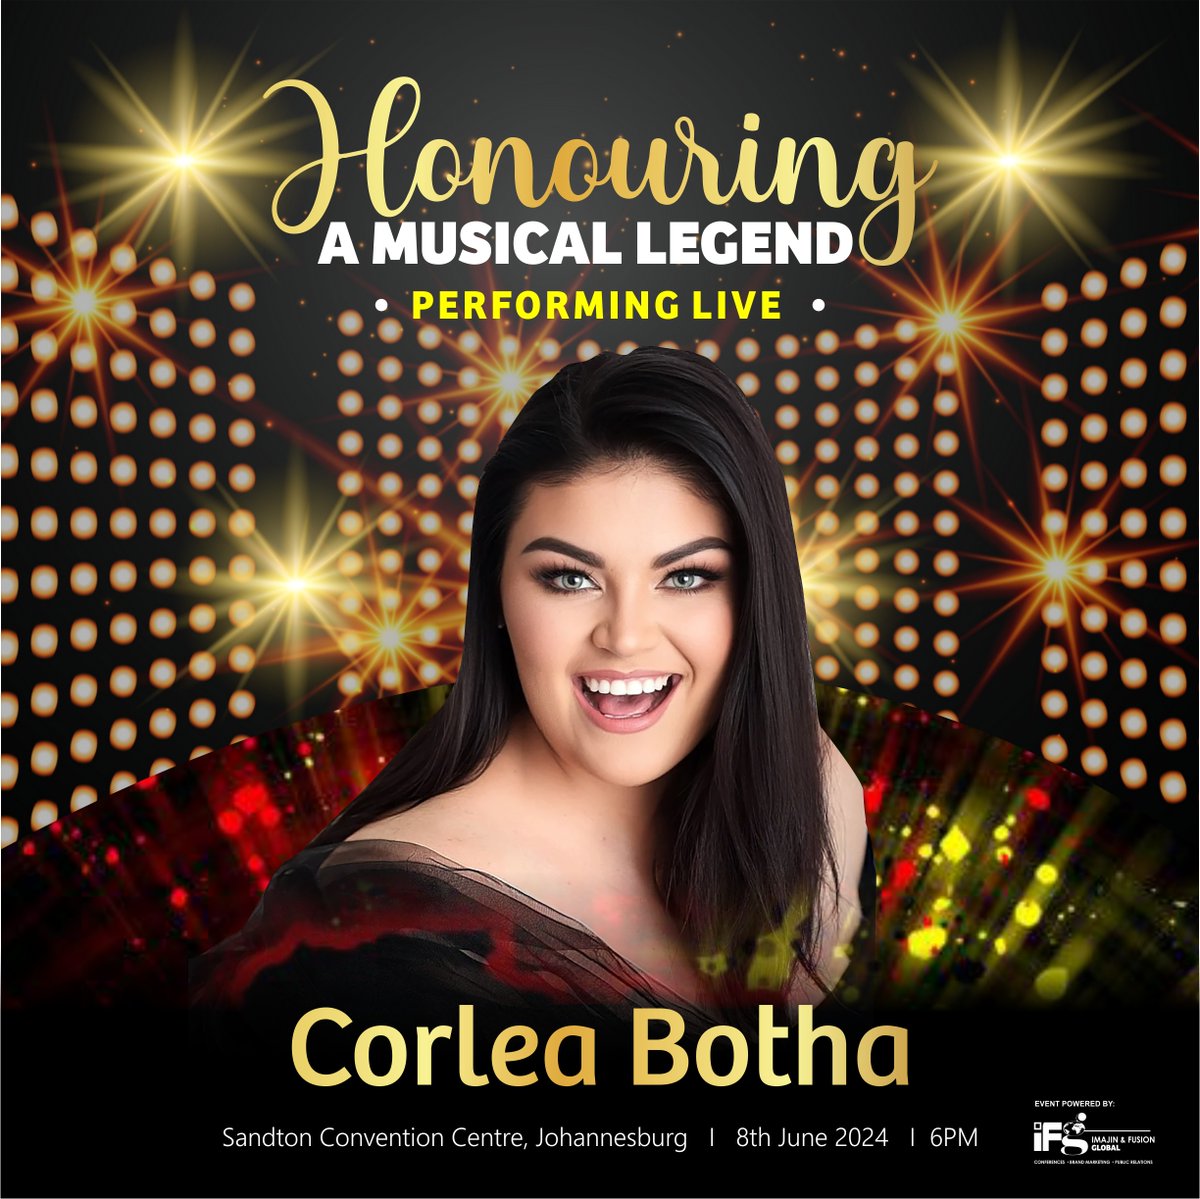 Afrikaans music at its finest with @CorleaBotha as she sets to serenade our fabulous guests at this year’s Legends and Legacy Awards on the 8th of June @SCC_Joburg
Tickets are now live bit.ly/4dxGwNm
#LegendsandLegacyMusicAwards #30YearsofDemocracy #CorleaBotha